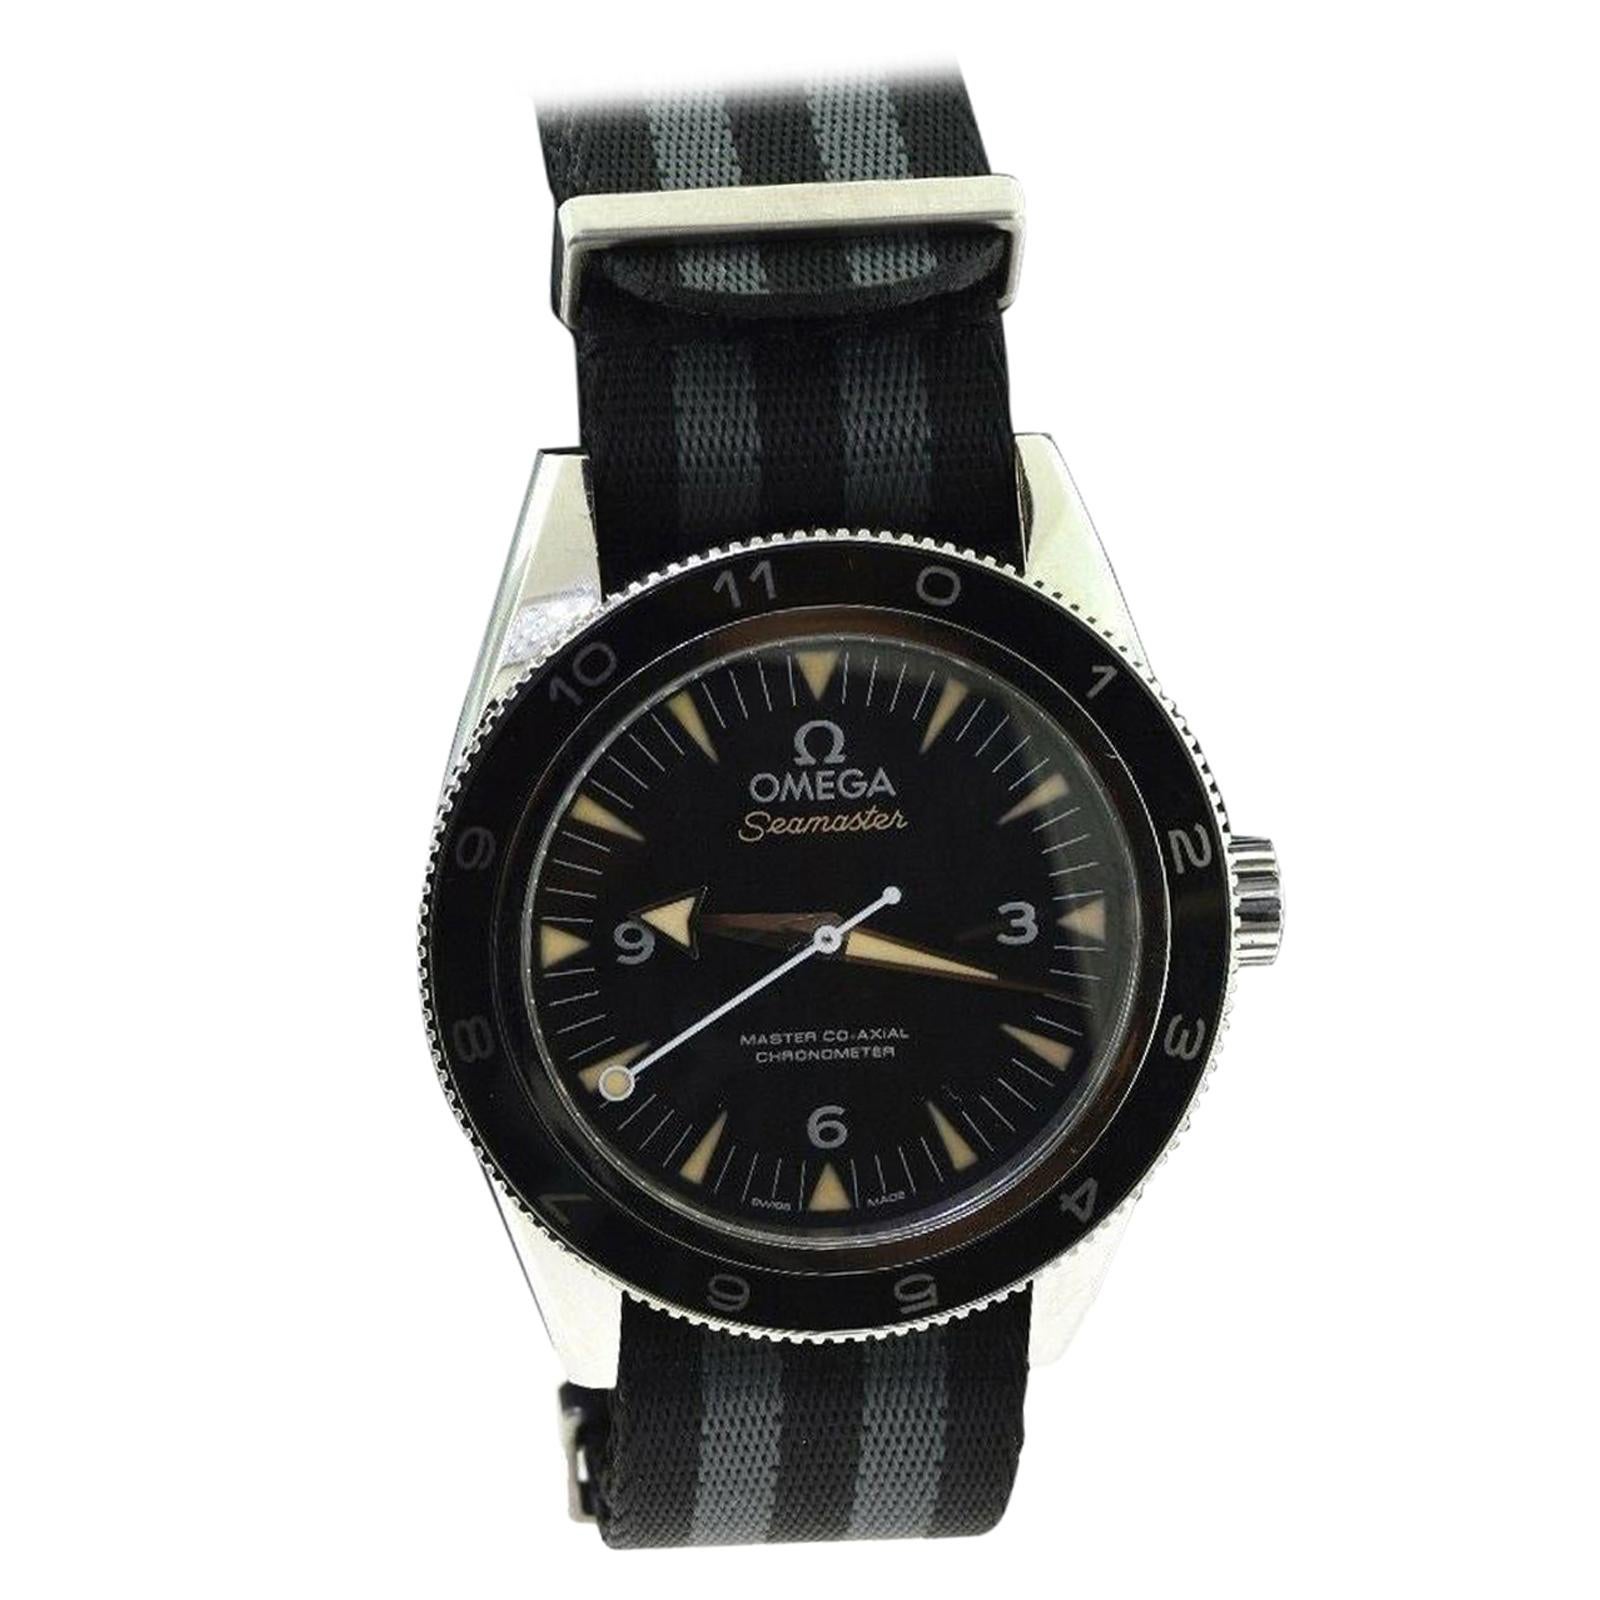 Omega Seamaster 300 Master Co-Axial "SPECTRE" Limited Edition For Sale